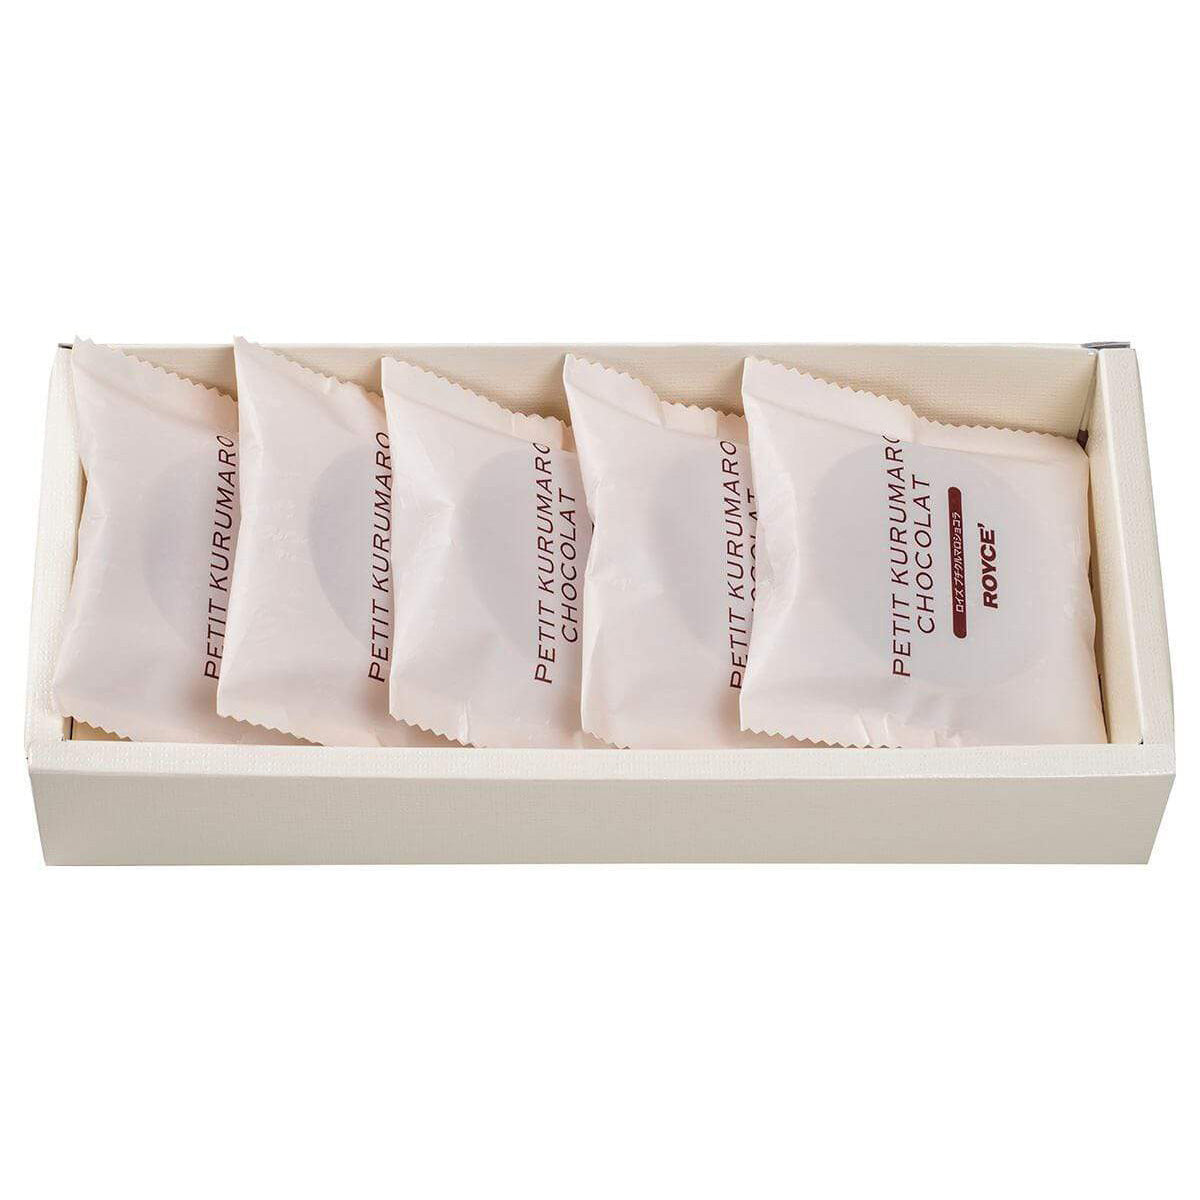 ROYCE' Chocolate - Petit Kurumaro Chocolat (5 Pcs) - Image shows an open box with individually-wrapped chocolate discs in white packaging. Each has text saying Petit Kurumaro Chocolat ROYCE'.